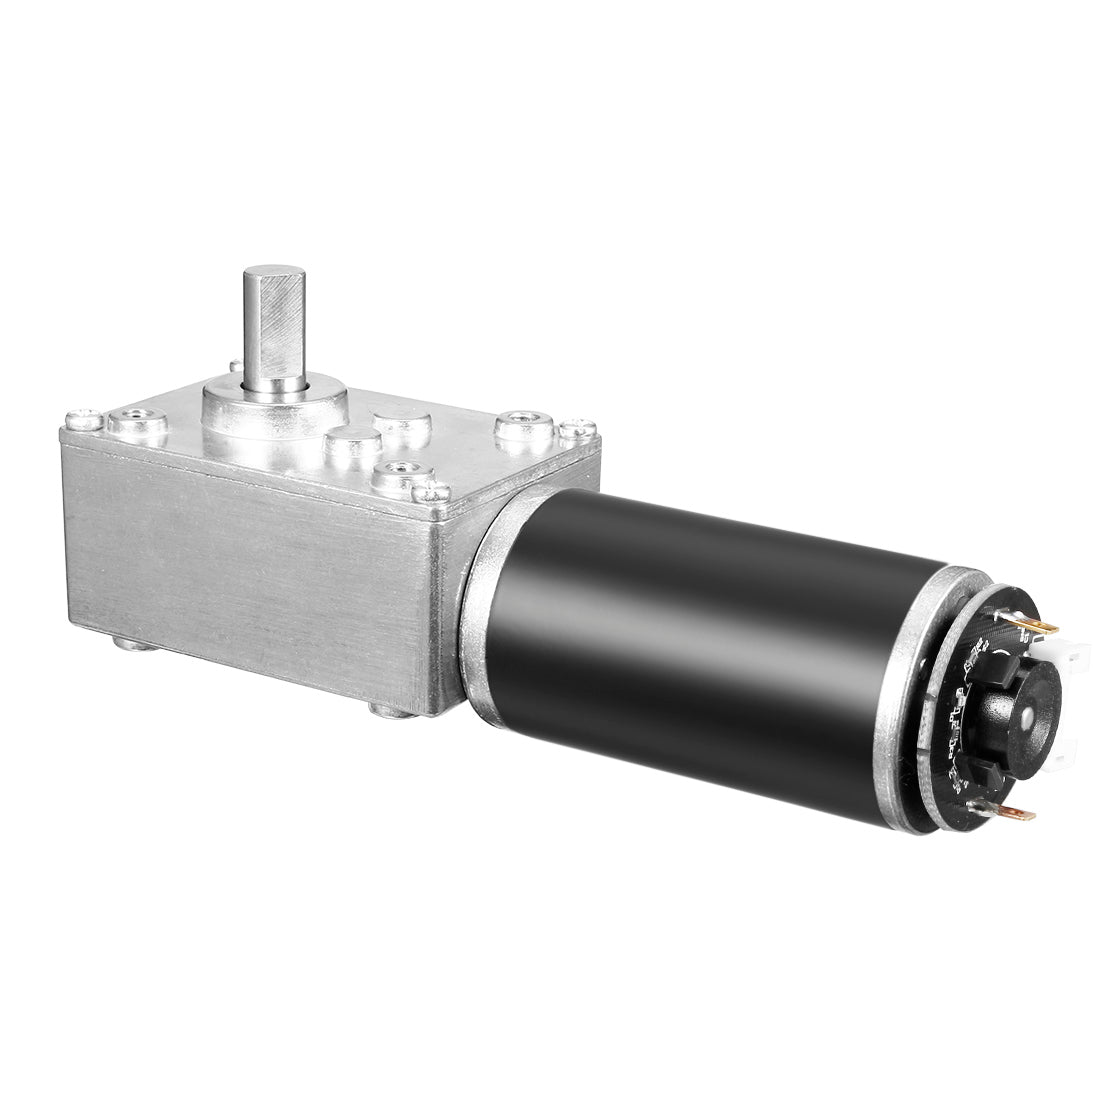 uxcell Uxcell DC 12V 111RPM 4Kg.cm Self-Locking Worm Gear Motor With Encoder And Cable, High Torque Speed Reduction Motor